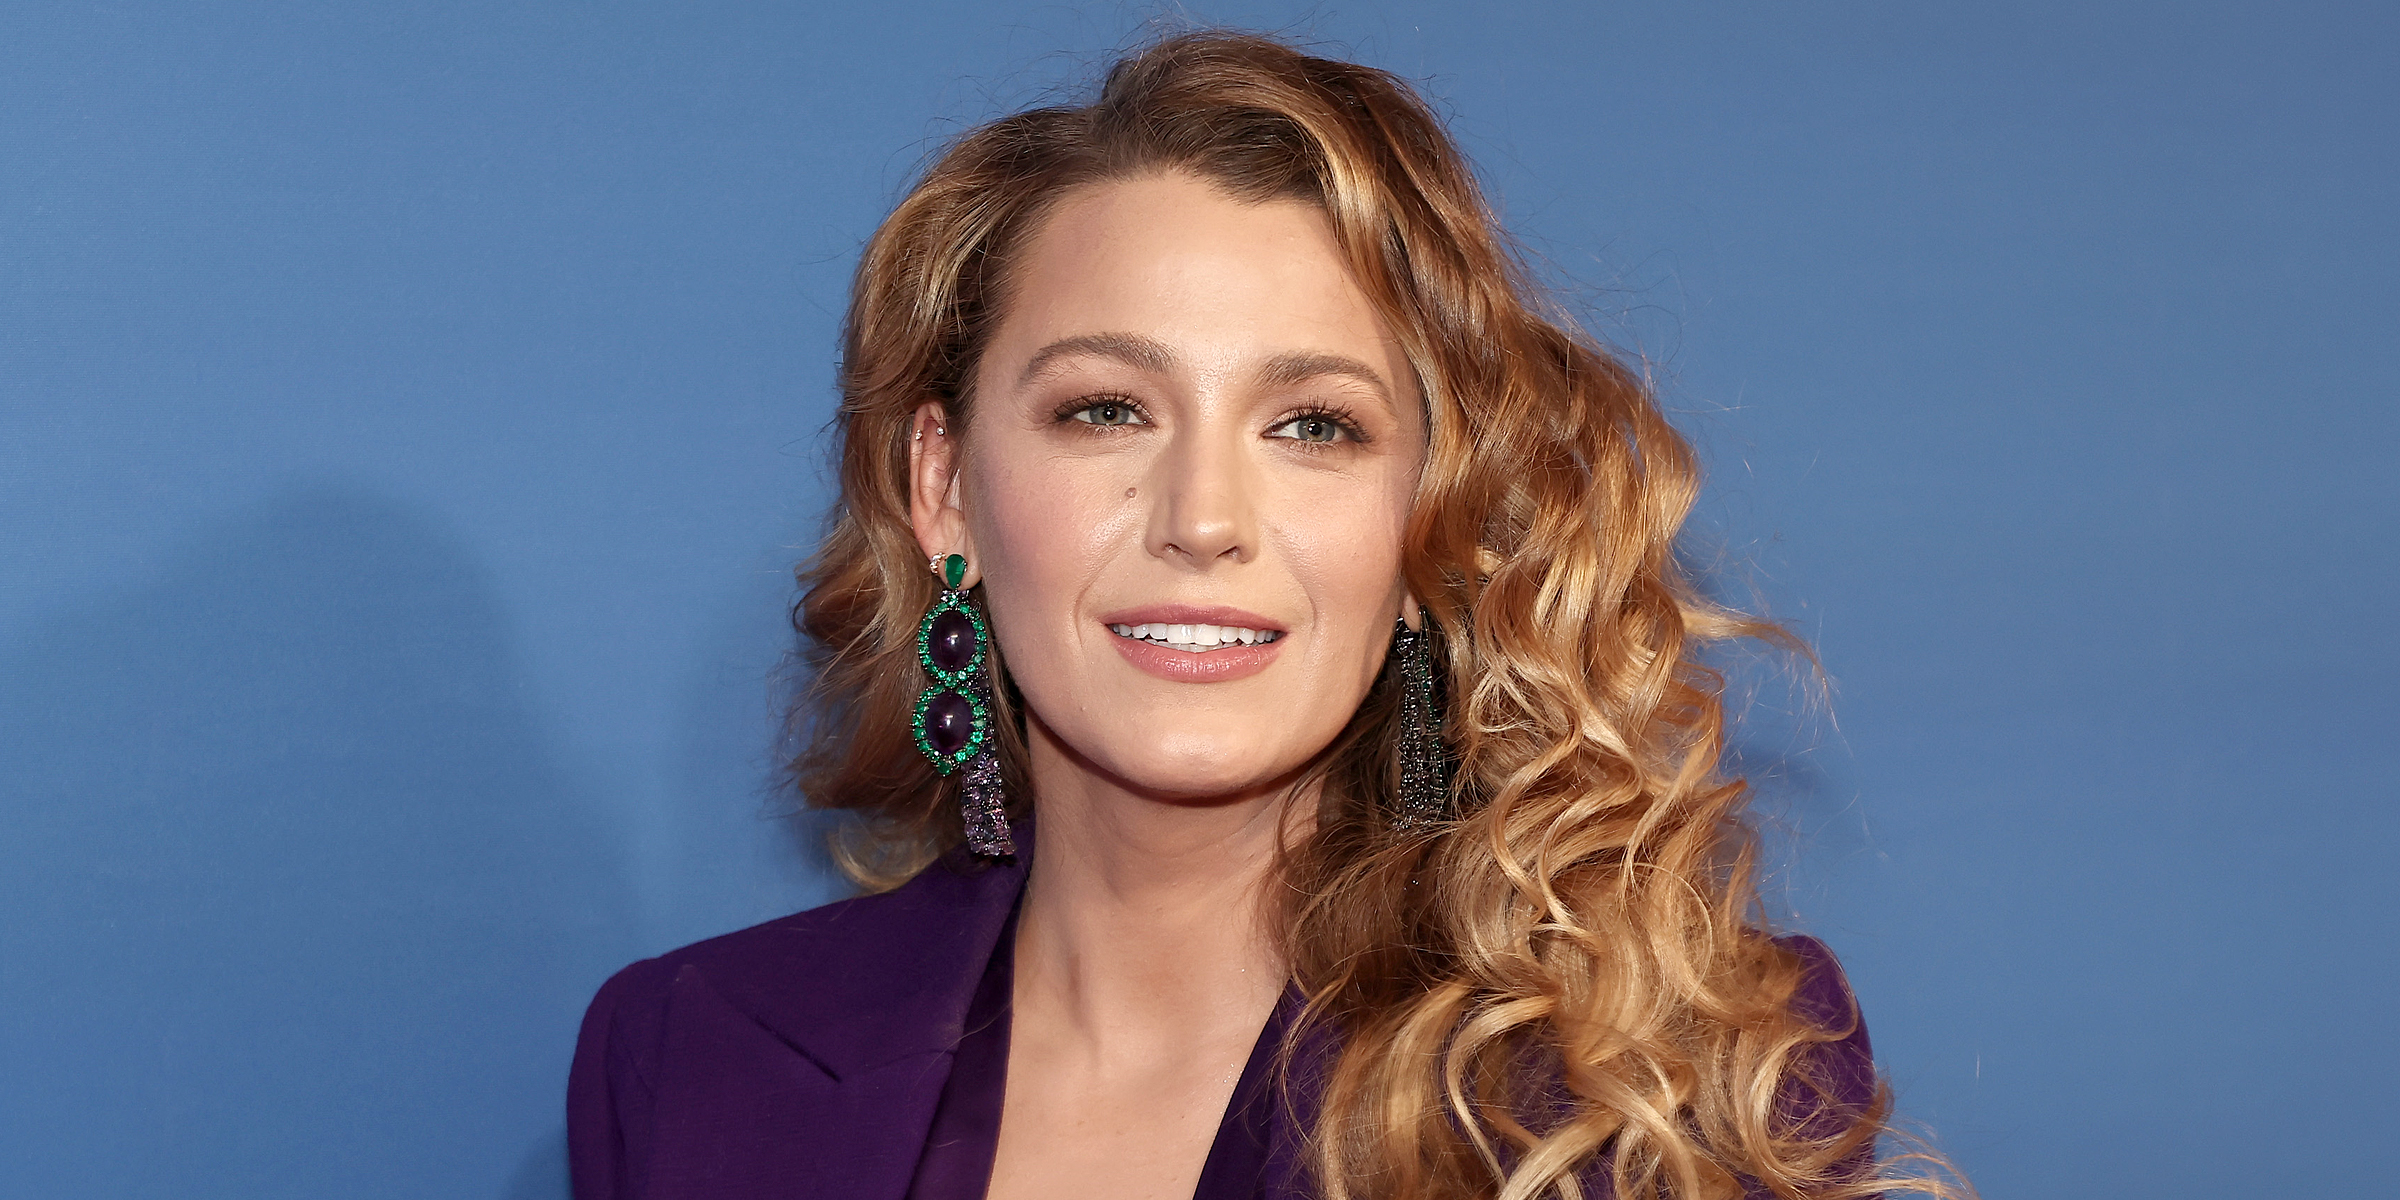 Blake Lively | Source: Getty Images